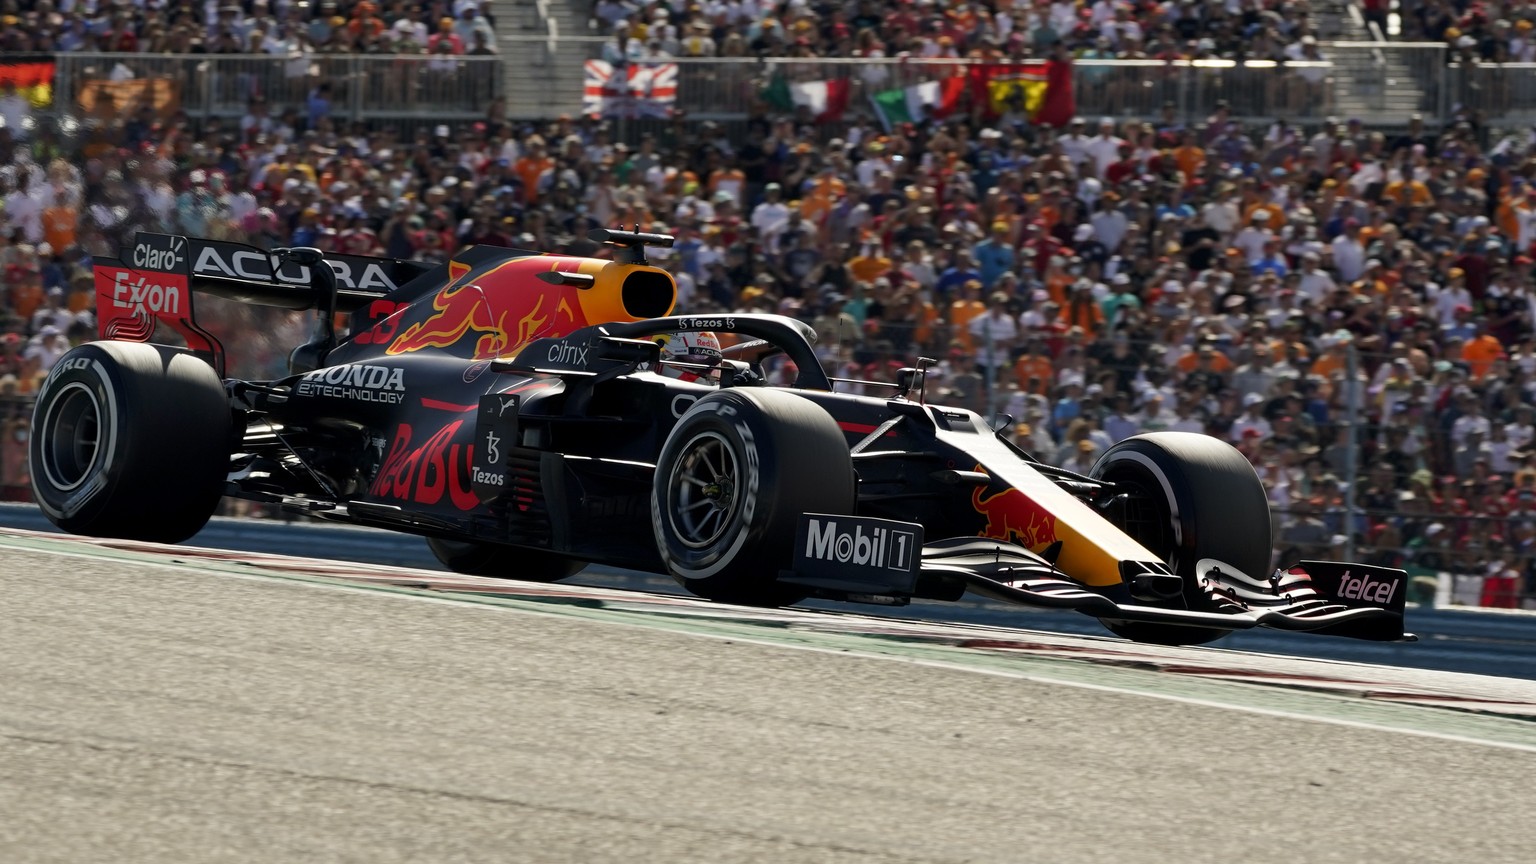 Red Bull driver Max Verstappen, of the Netherlands, races during the Formula One U.S. Grand Prix auto race at the Circuit of the Americas, Sunday, Oct. 24, 2021, in Austin, Texas. (AP Photo/Eric Gay)